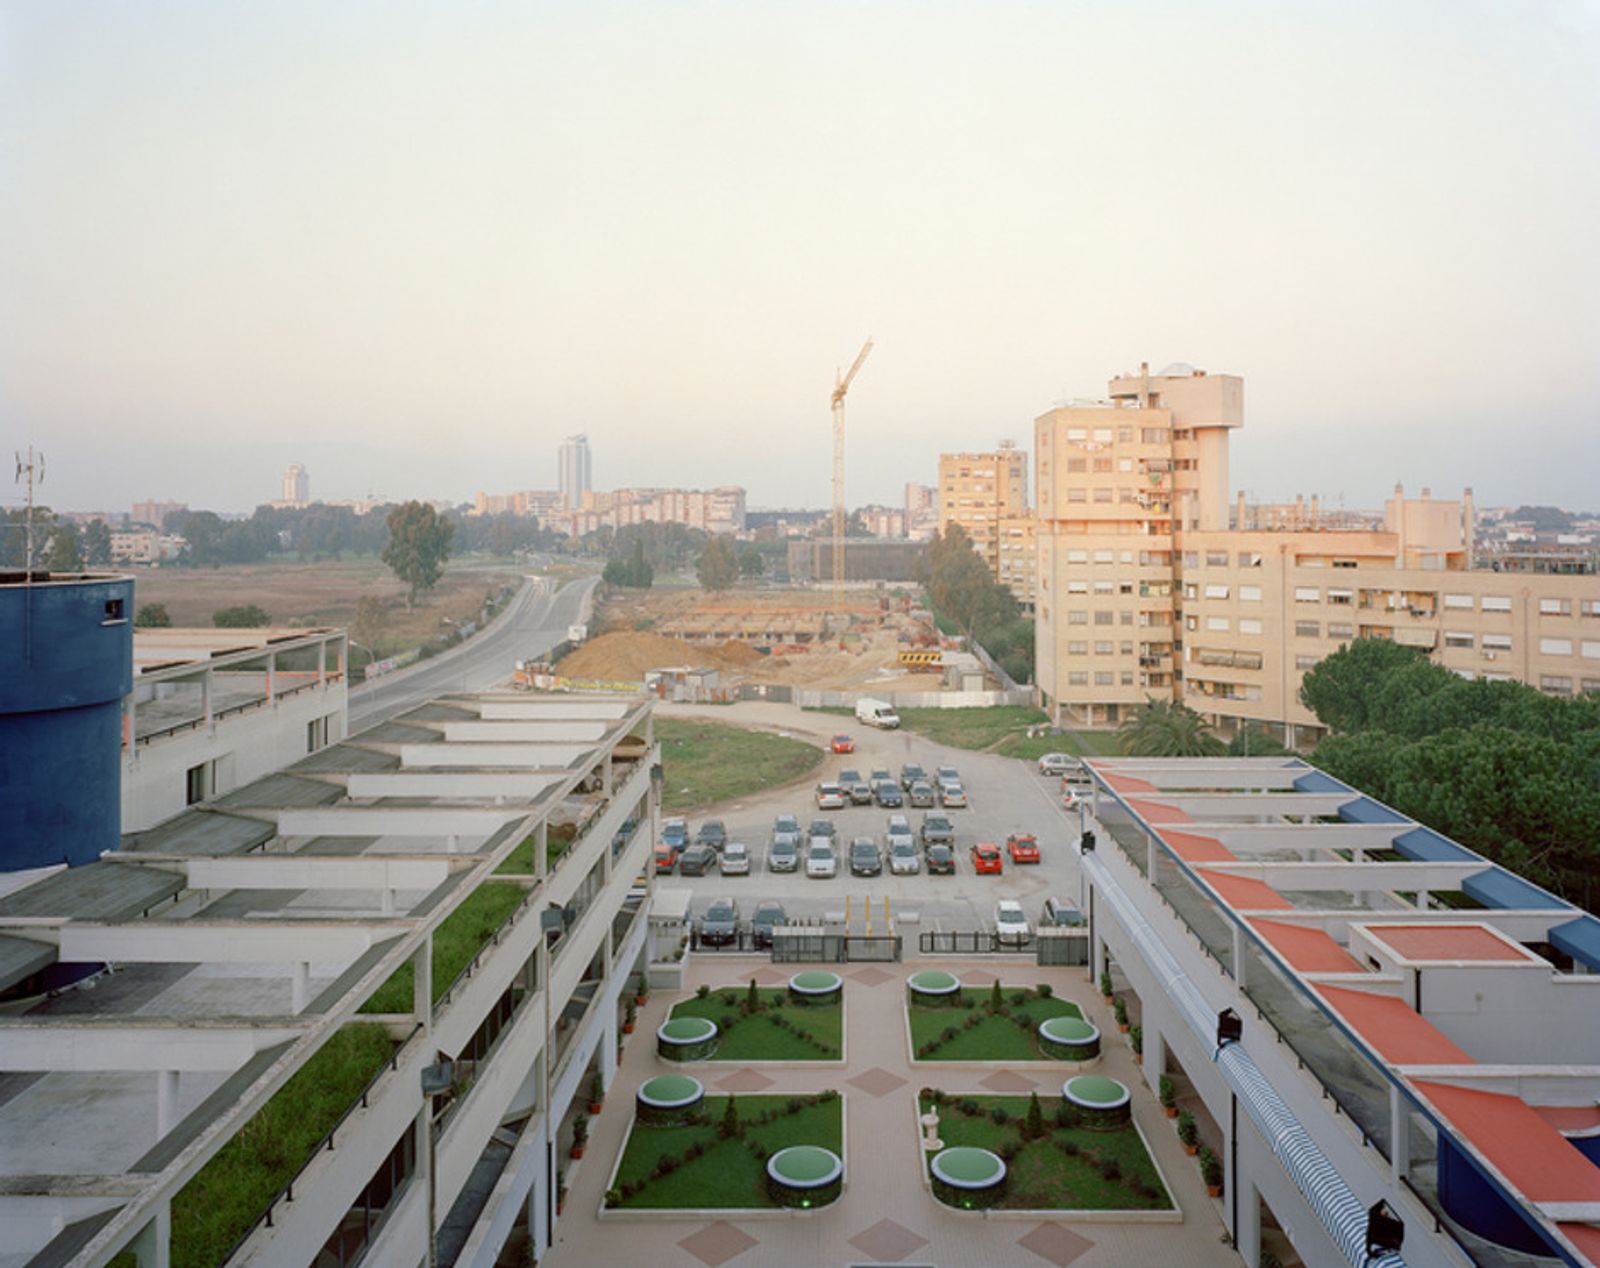 © Gabriele Rossi - Image from the Olim Palus : a new city photography project